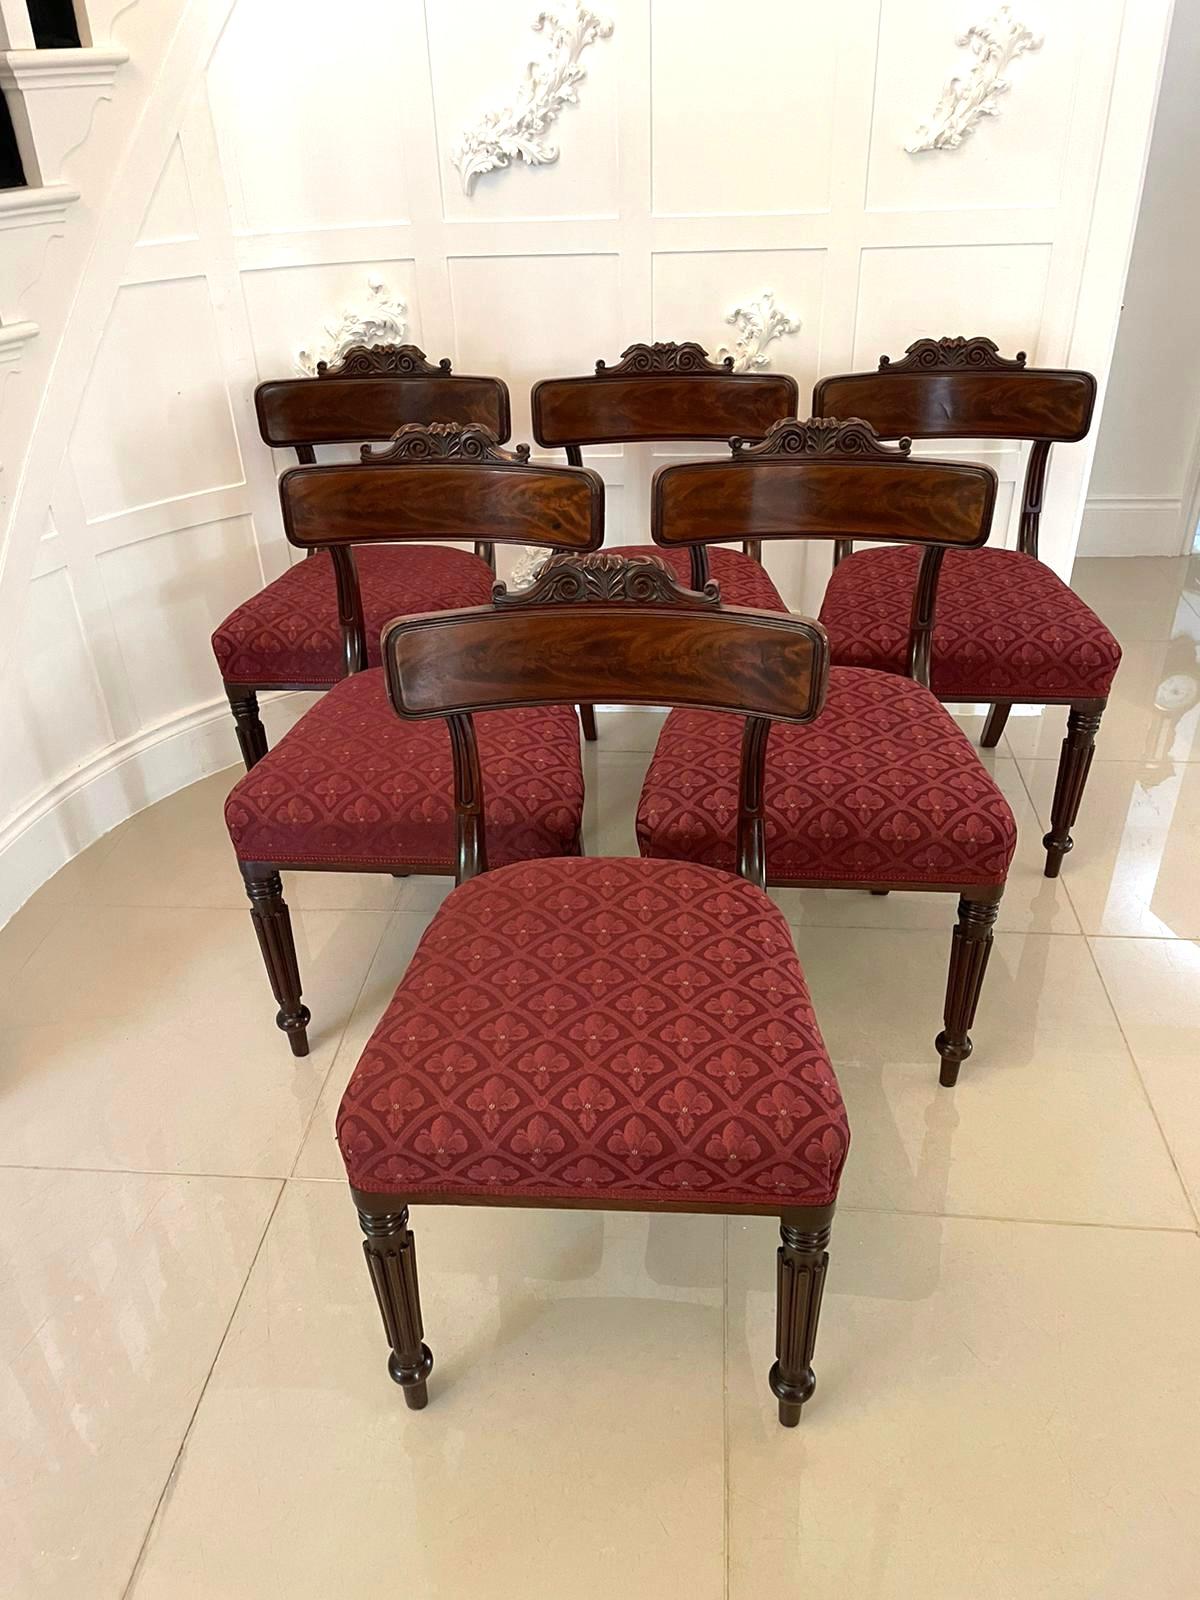 Fine set of 6 antique regency quality mahogany library chairs by the prestigious furniture maker Gillows of Lancaster and London having a quality figured mahogany top rail with a reeded edge and carved top supported by shaped reeded supports